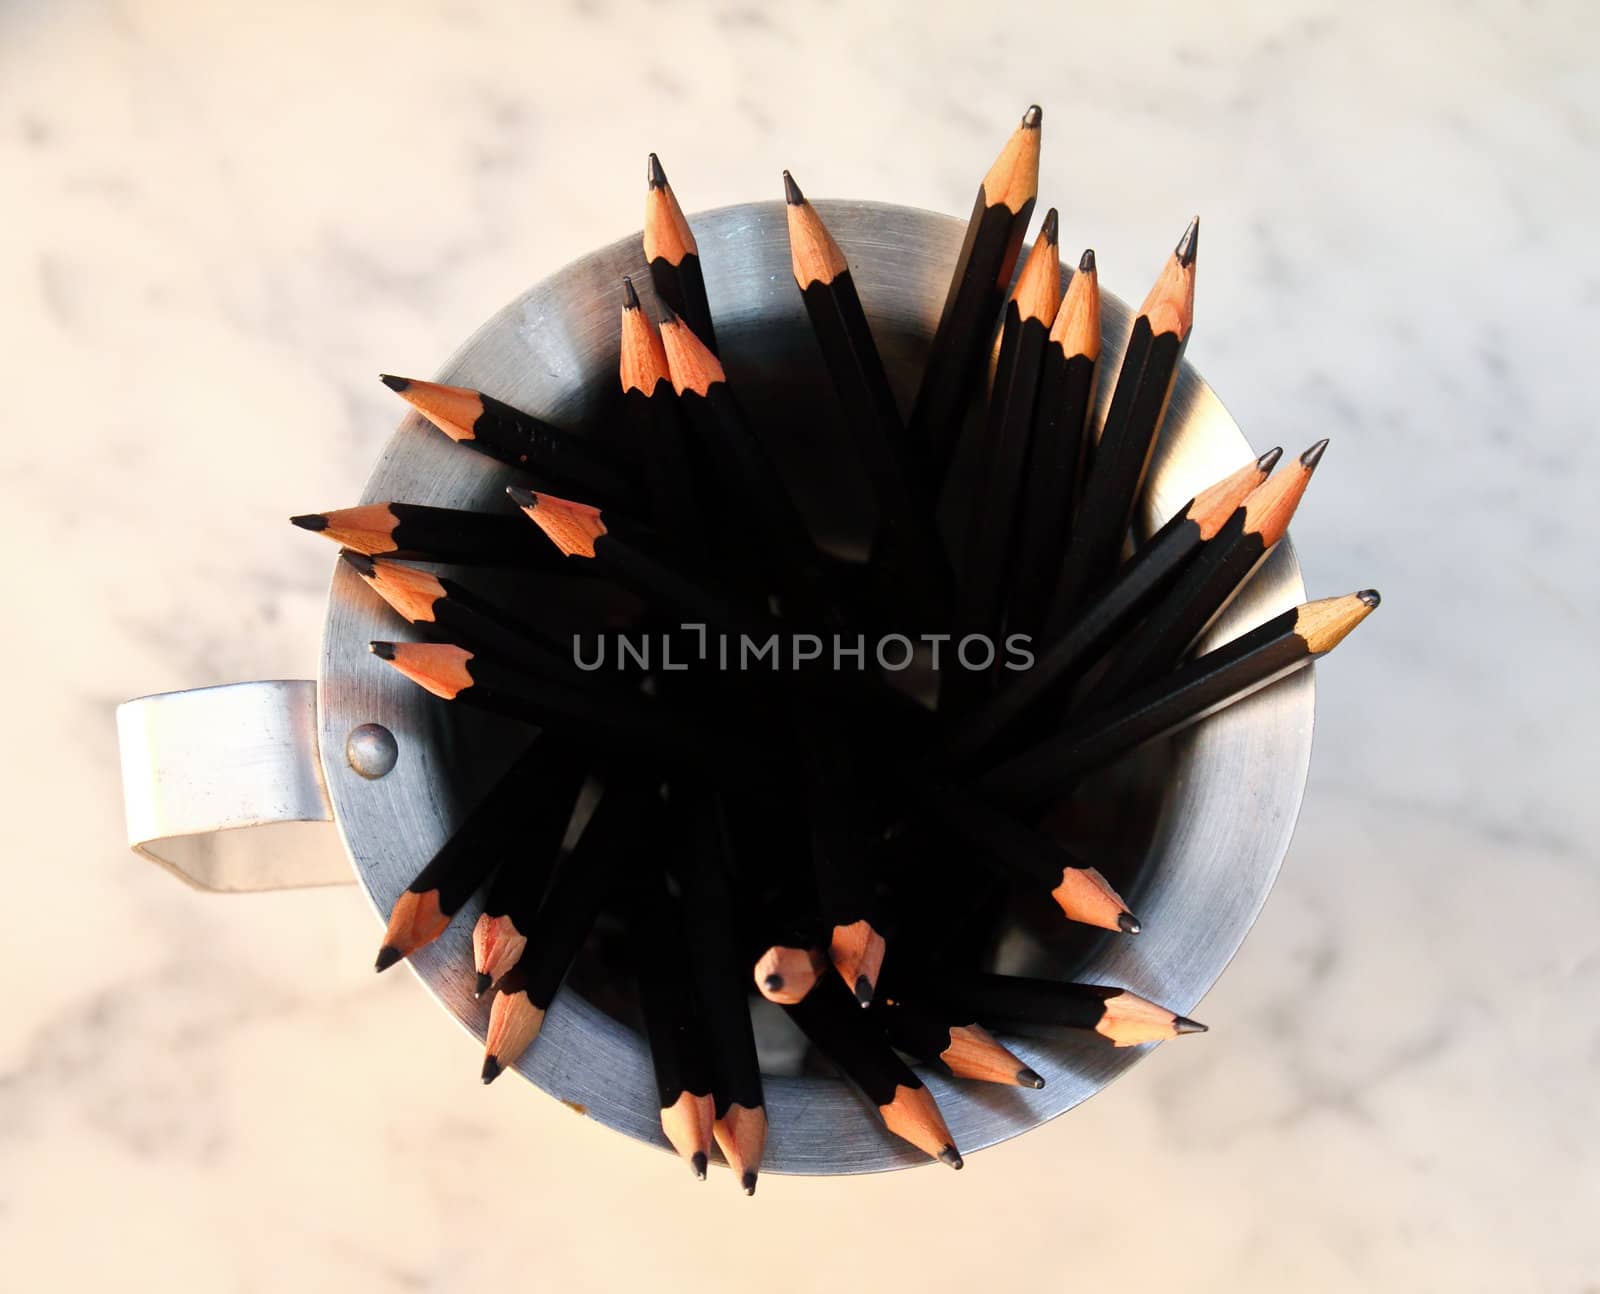 Bunch of pencils on cup